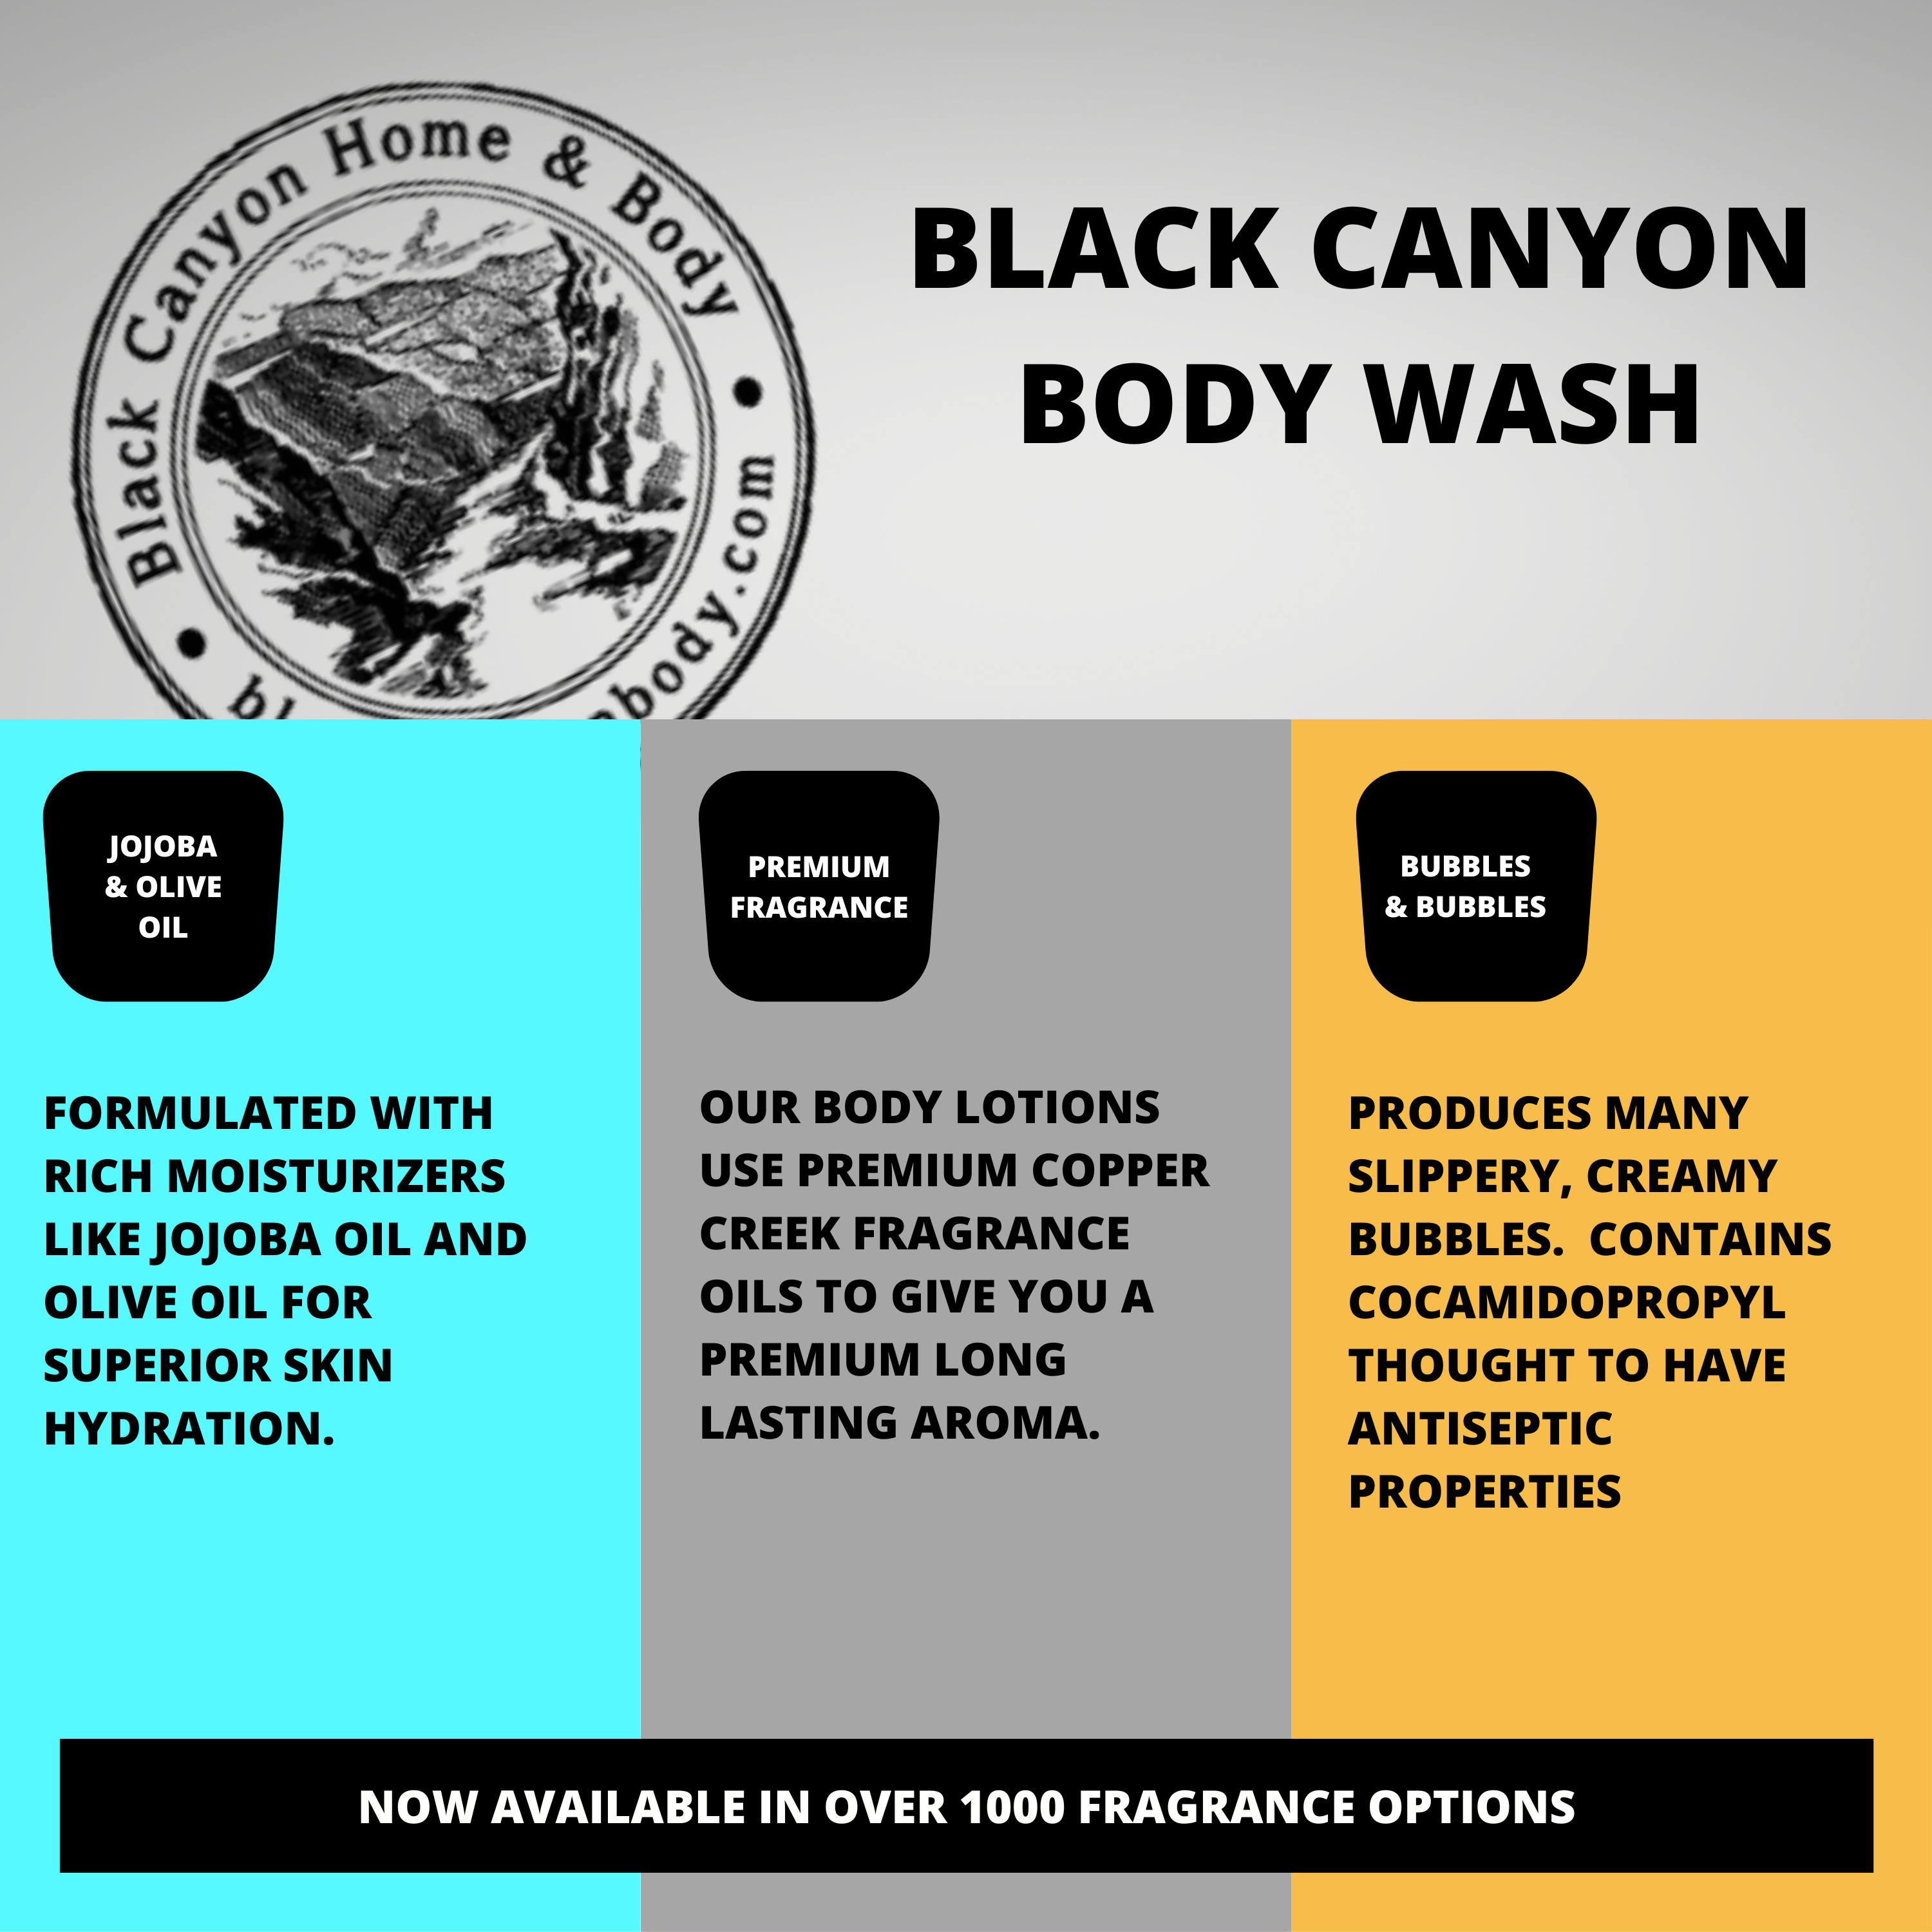 Black Canyon Black Currant & Cranberry Scented Luxury Body Wash